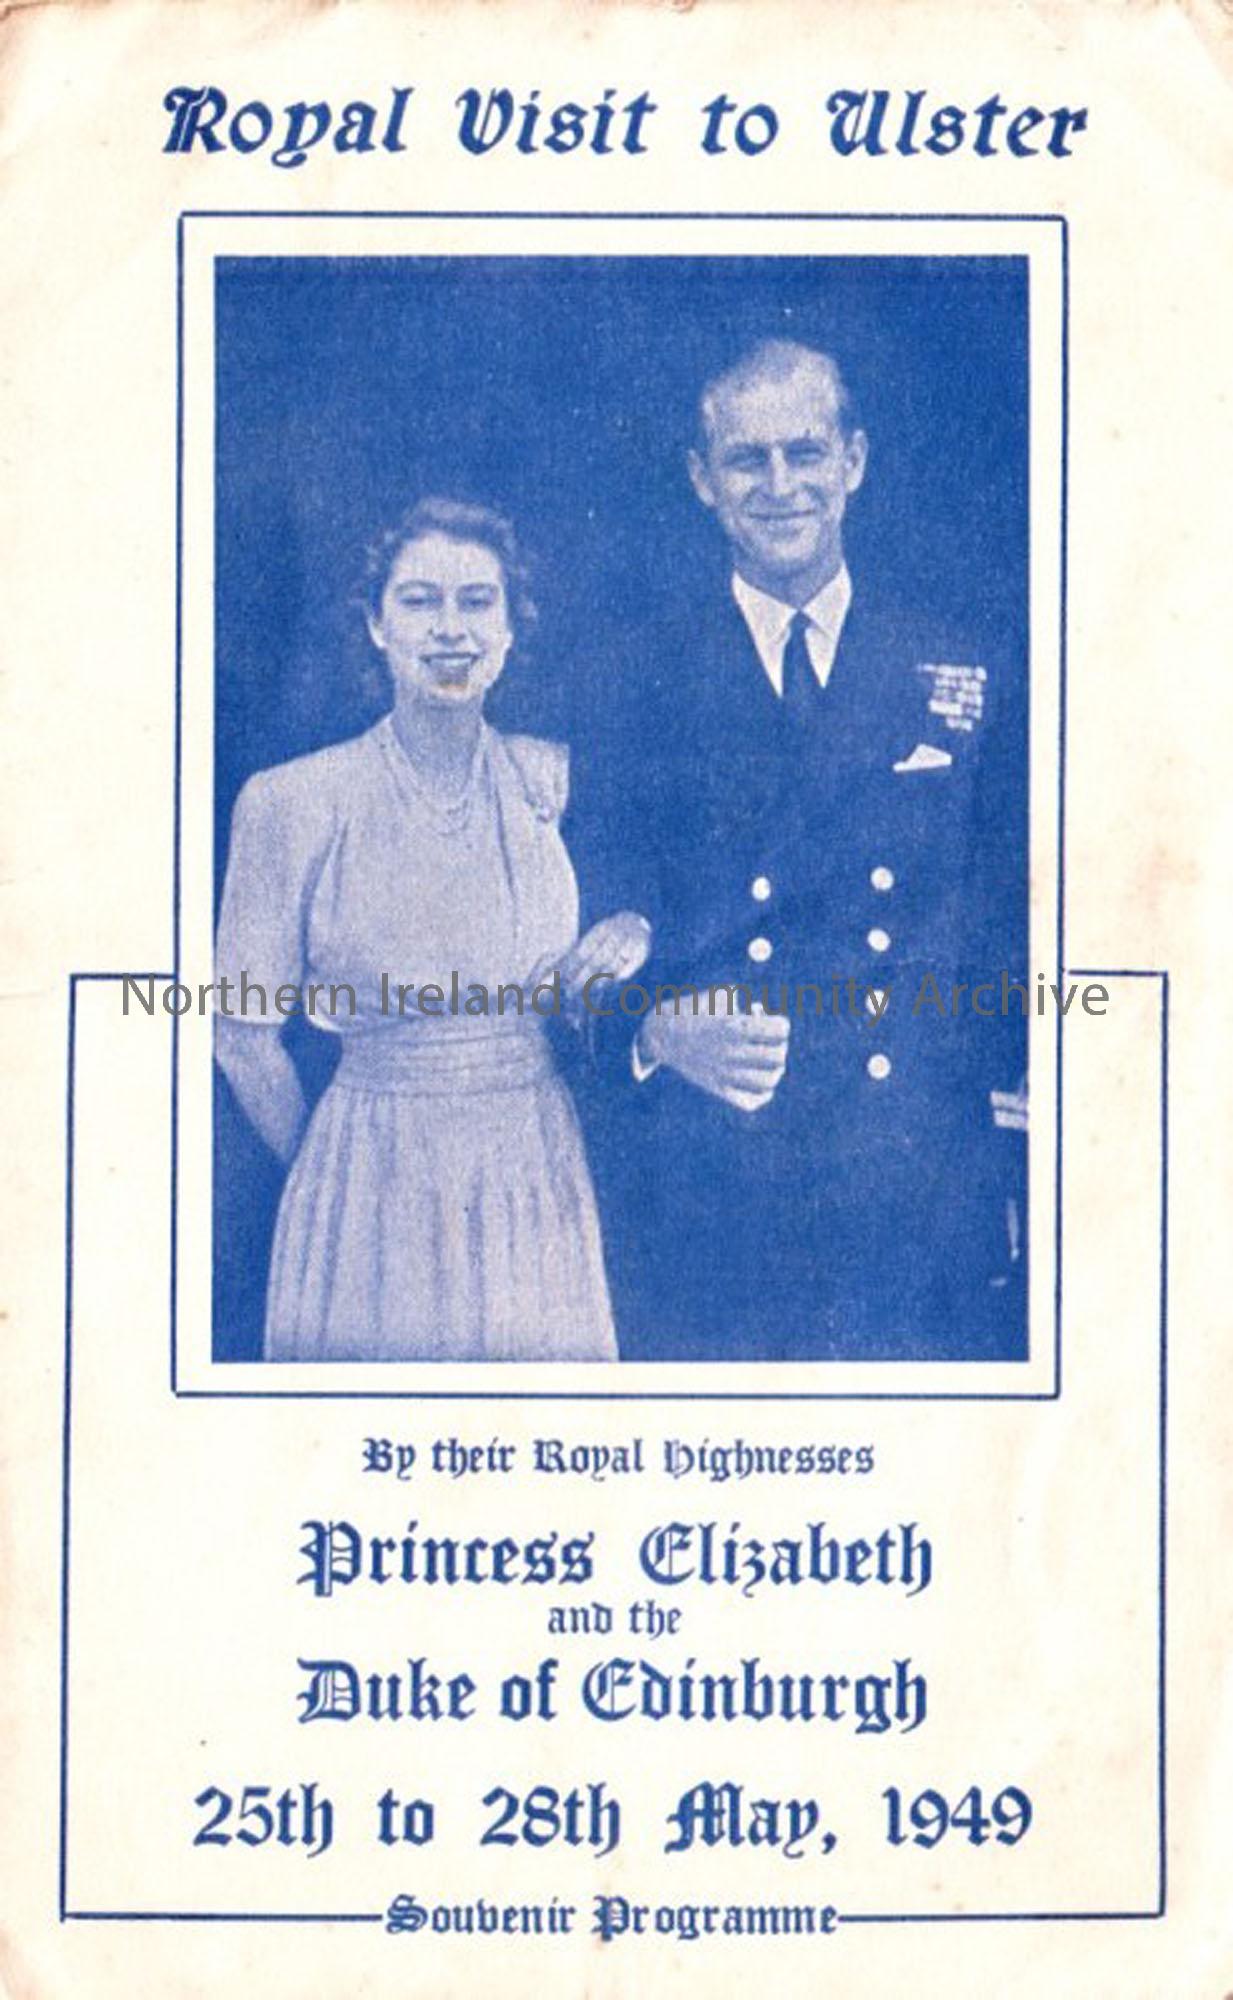 Royal Visit to Ulster by their Royal highness Princess Elizabeth and the Duke of Edinburgh, 25th-28th May, 1949 souvenir programme.